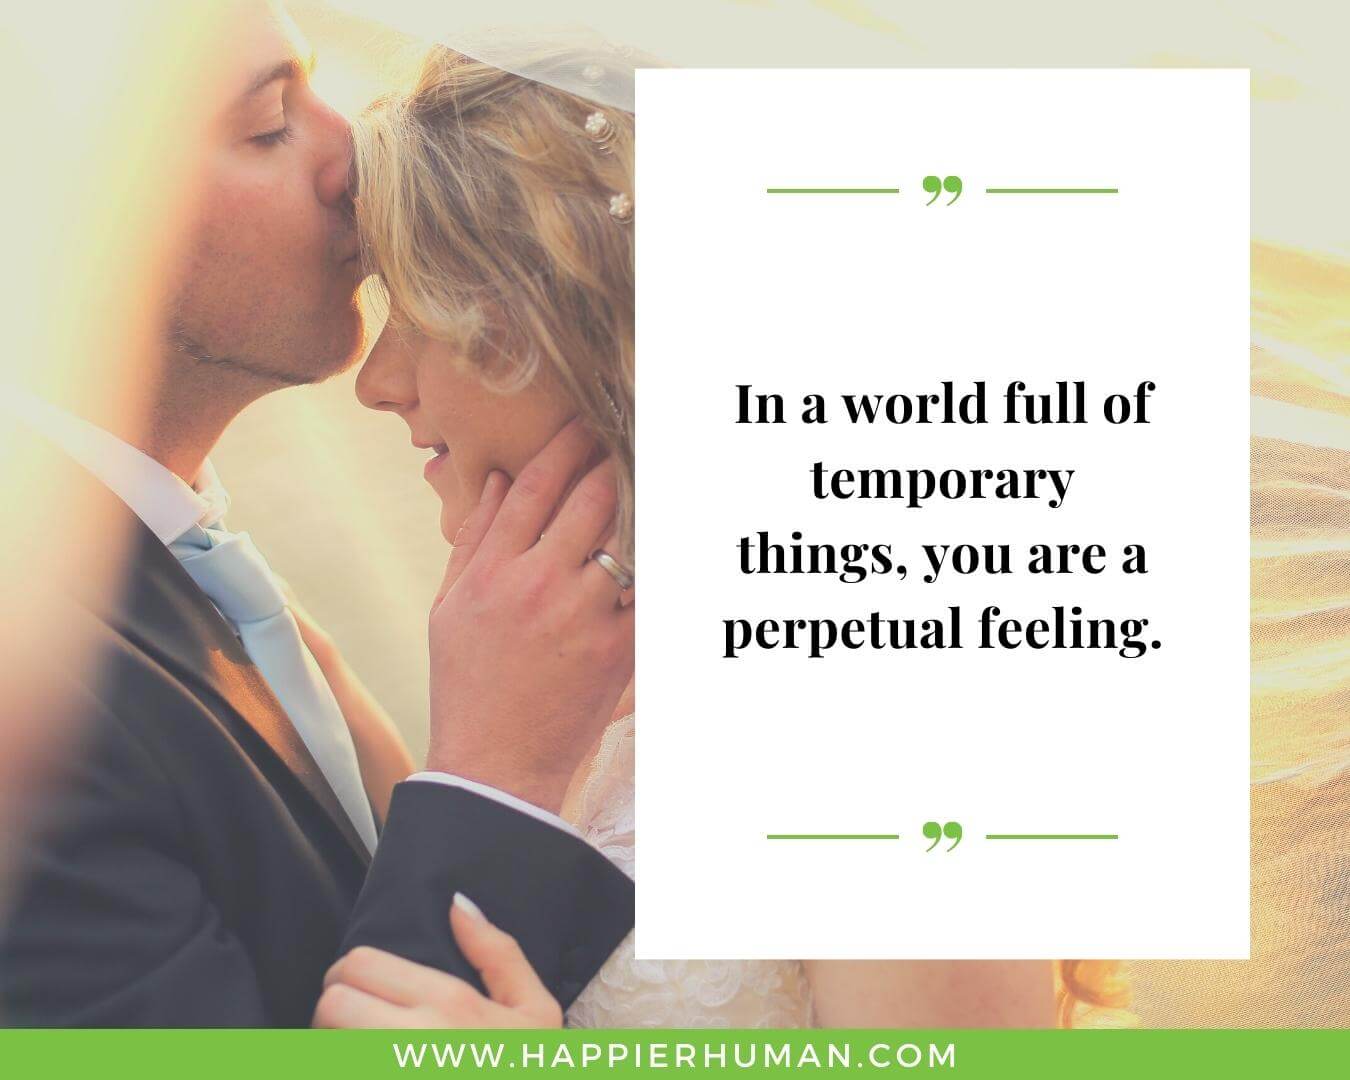 Unconditional Love Quotes for Her - “In a world full of temporary things, you are a perpetual feeling.”